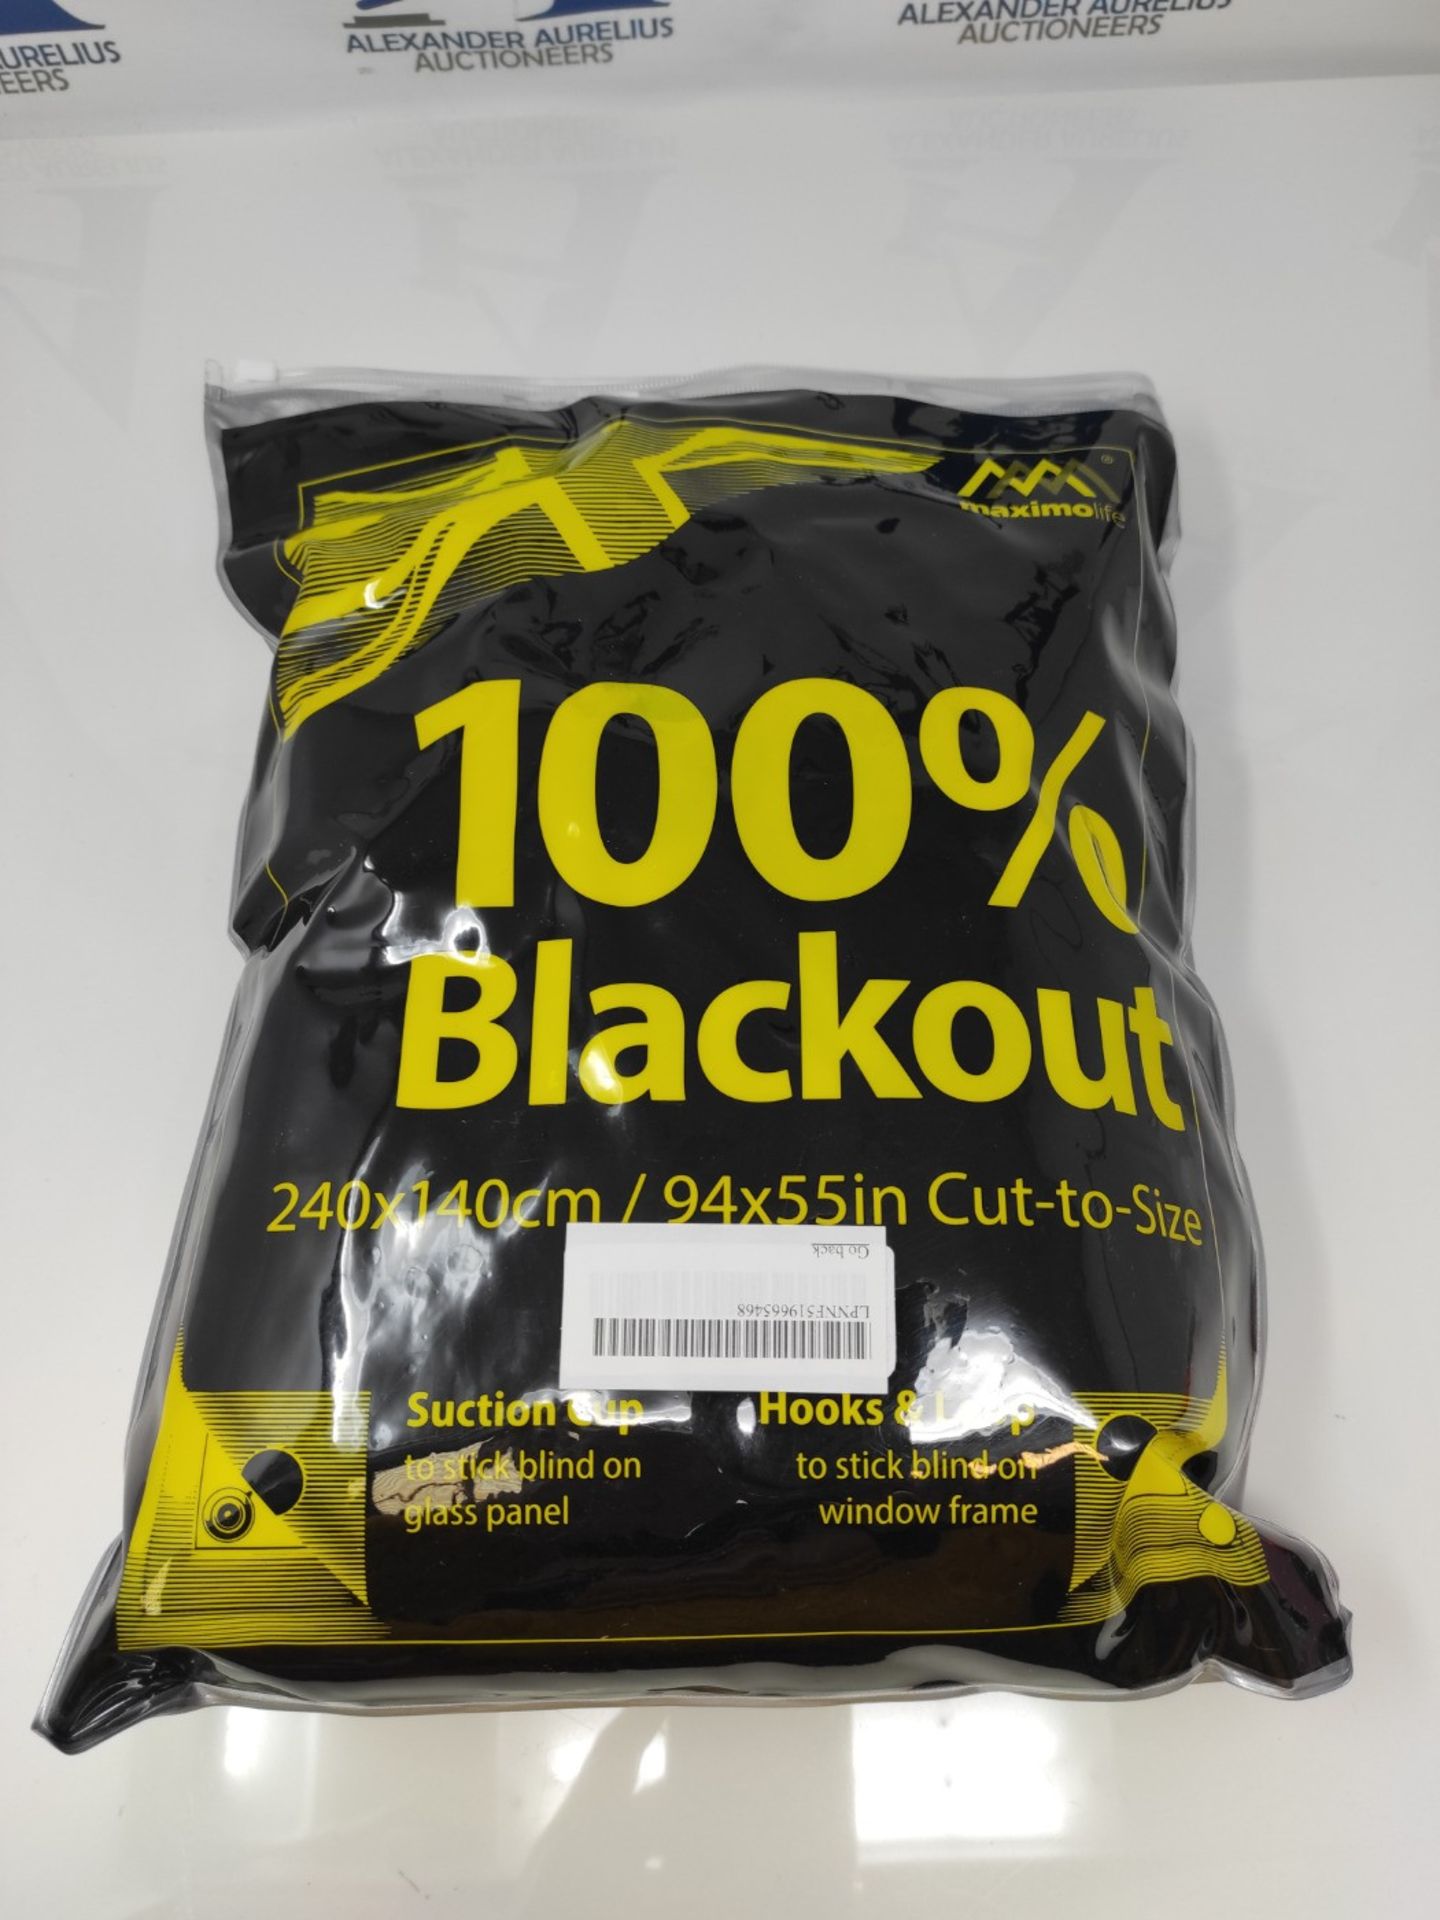 MaximoLife® Simply 100% Blackout | Blackout Blind for Any Window up to 240x140cm | 24